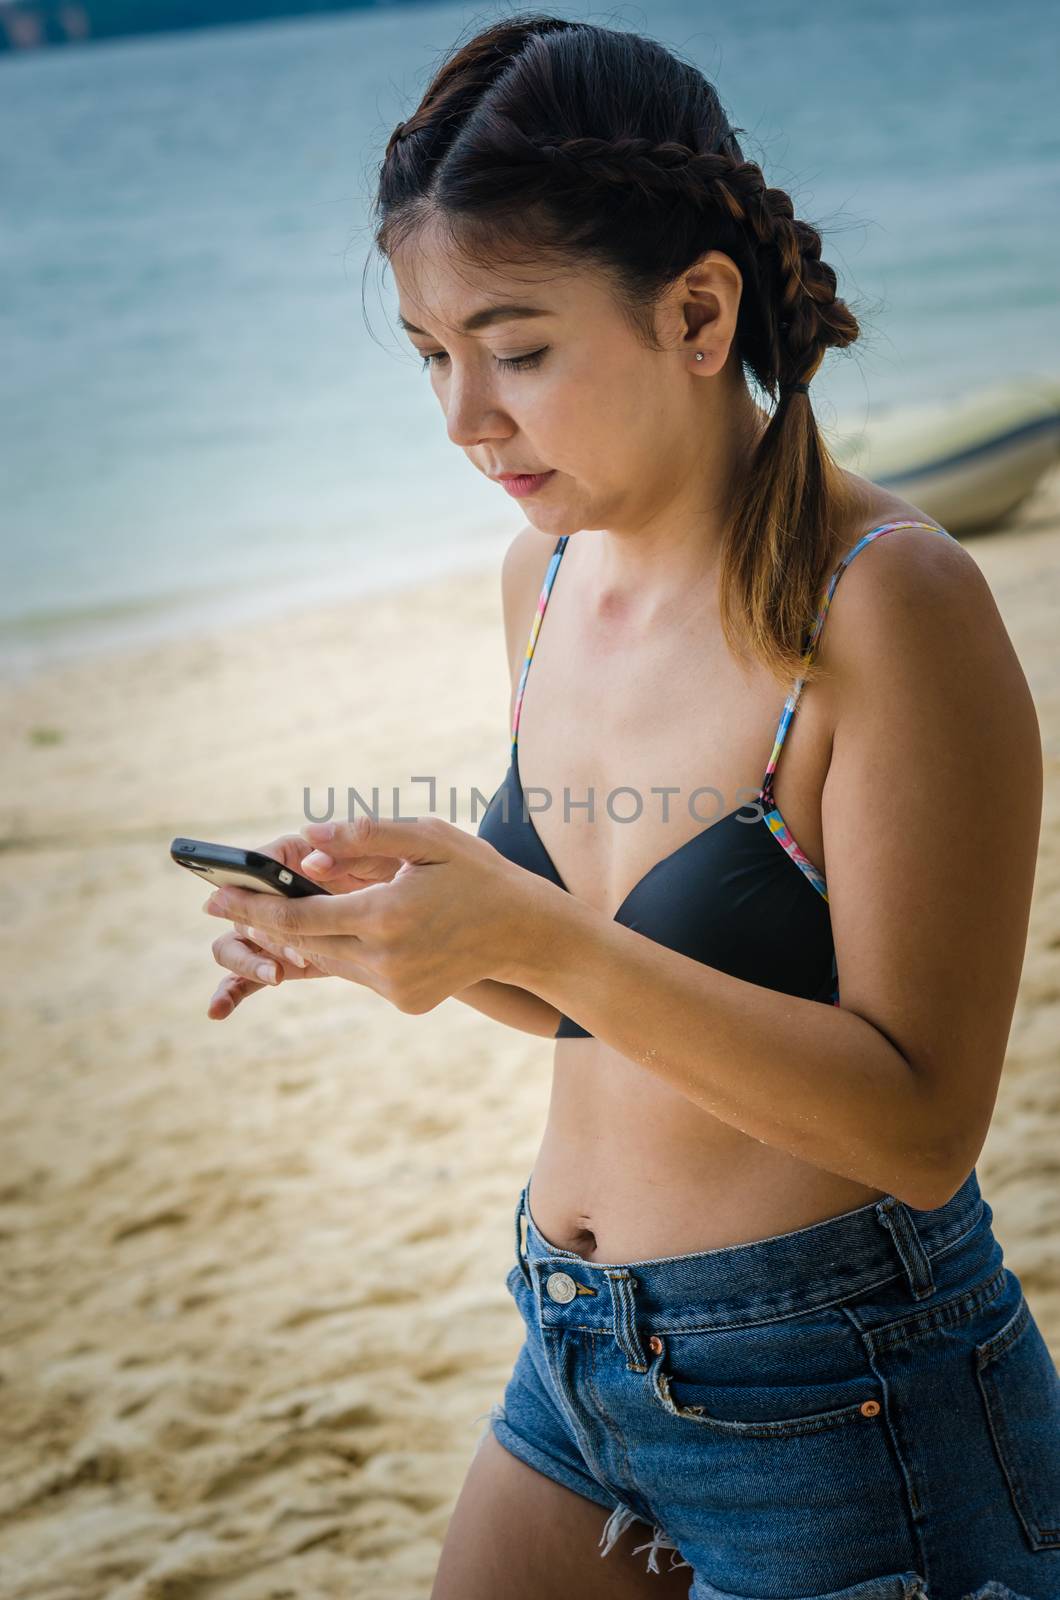 Beautiful young woman uses a smartphone on the beach. Filter vintage